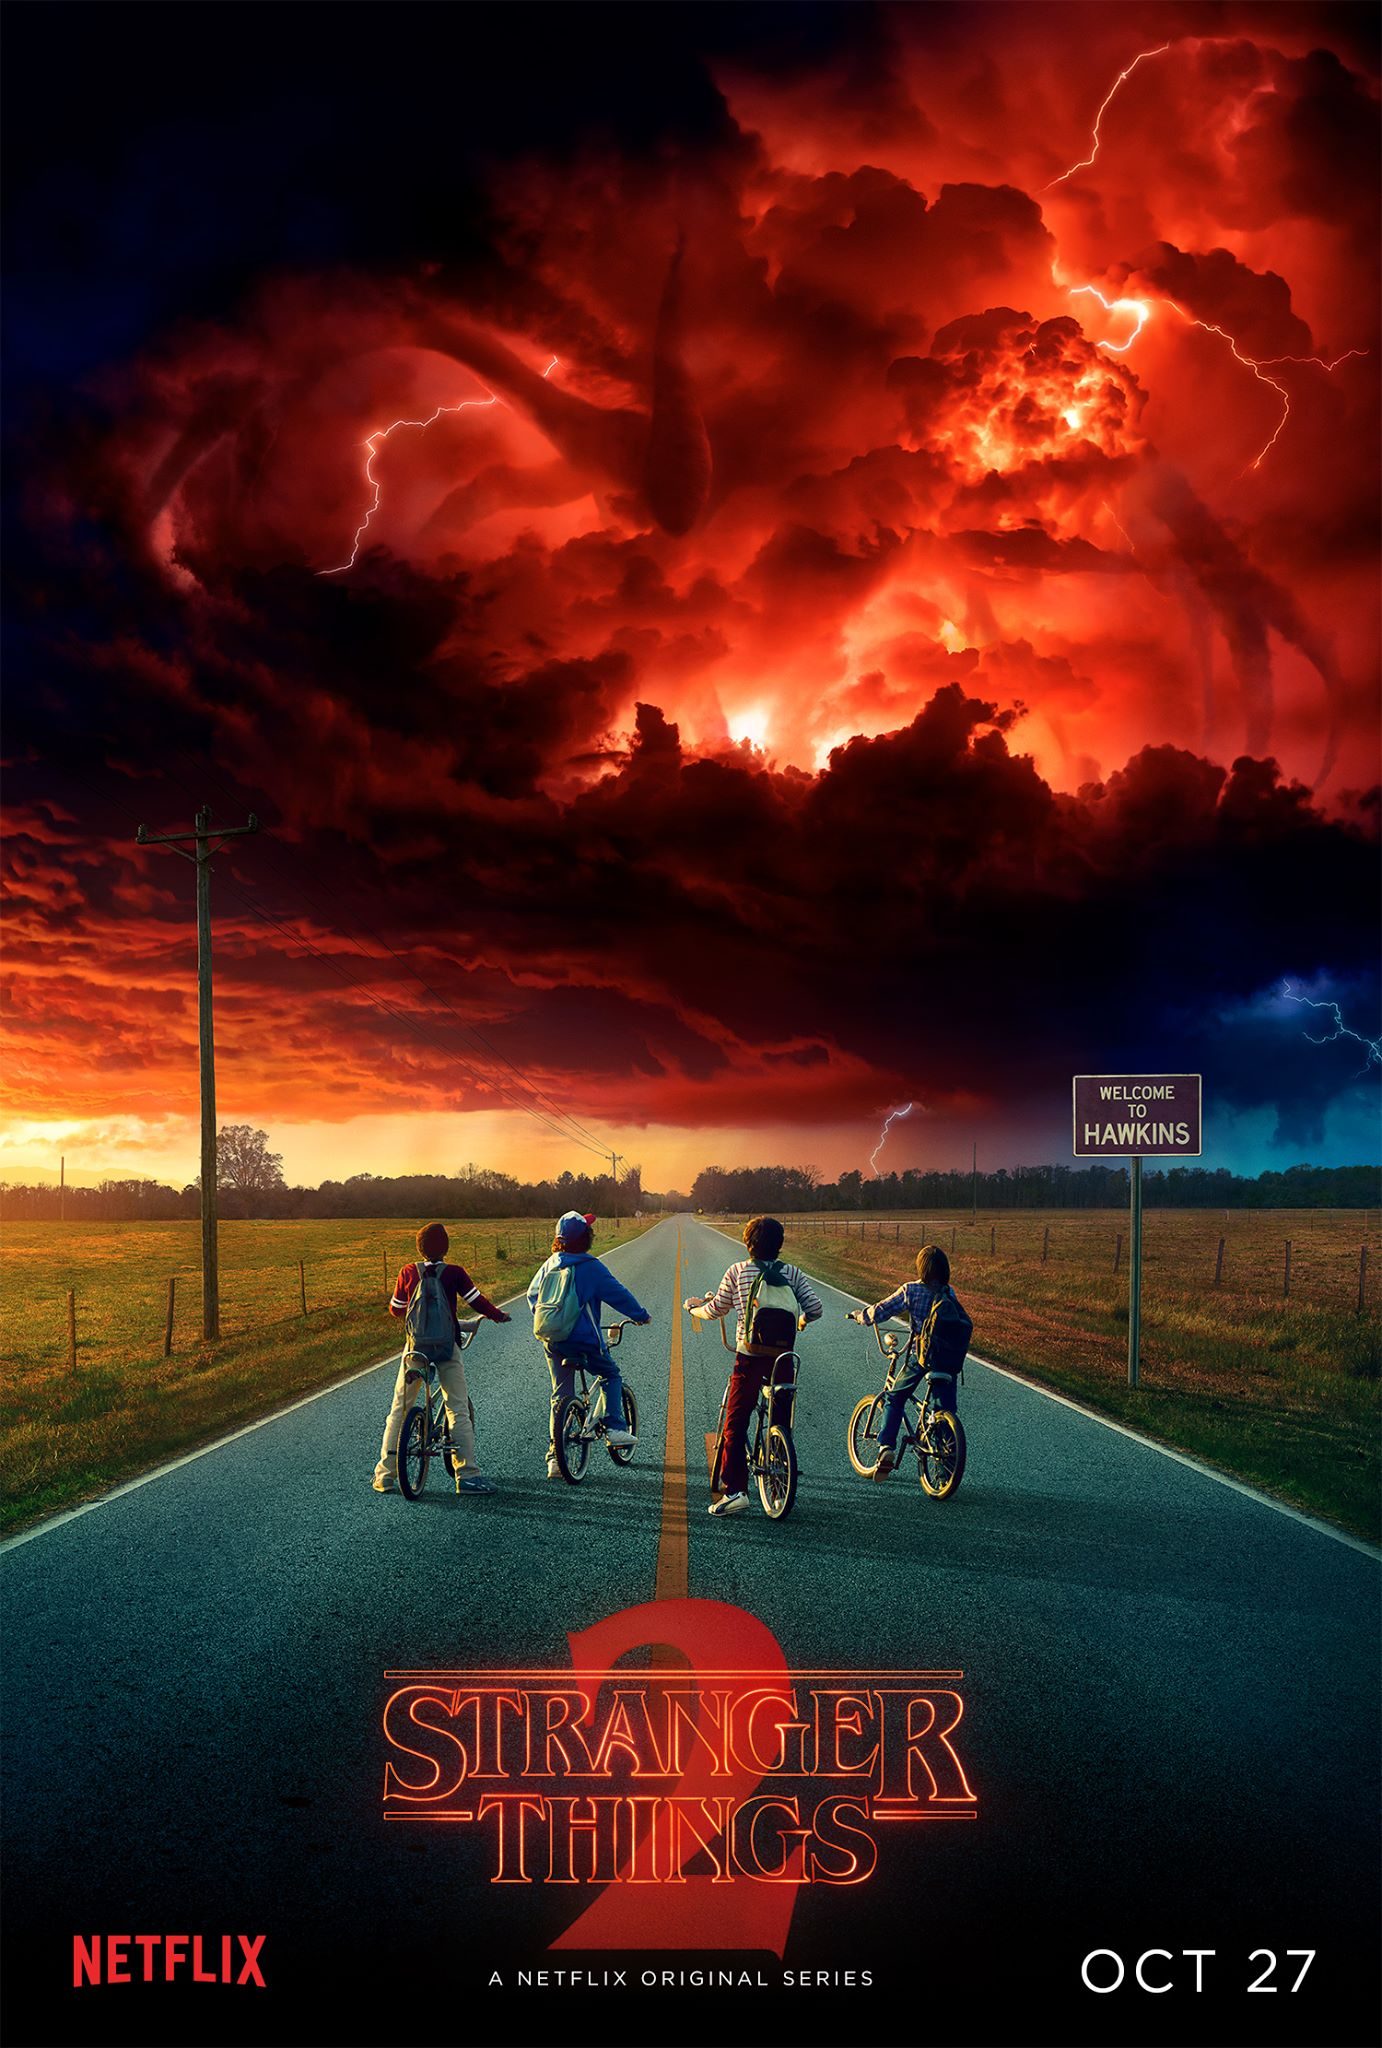 ‘Stranger Things’ season 2 out in a few months